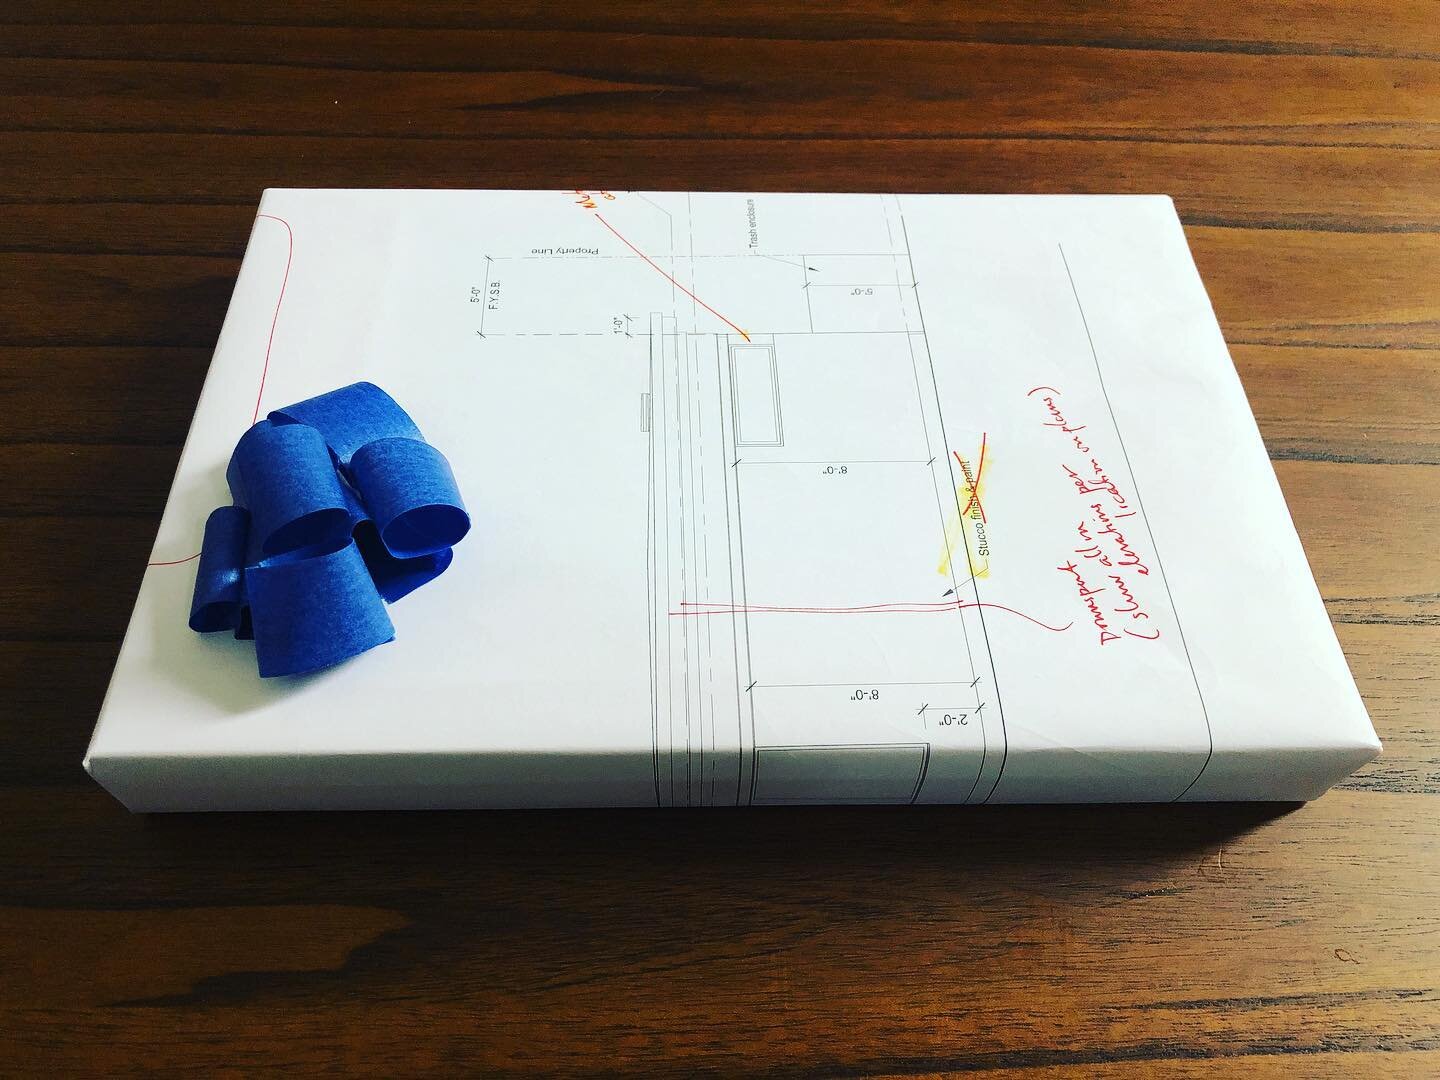 Blue tape and redlines. Tradition. *
*
*
#merrychristmas #architecture #design #sandiego #tradition #recycle